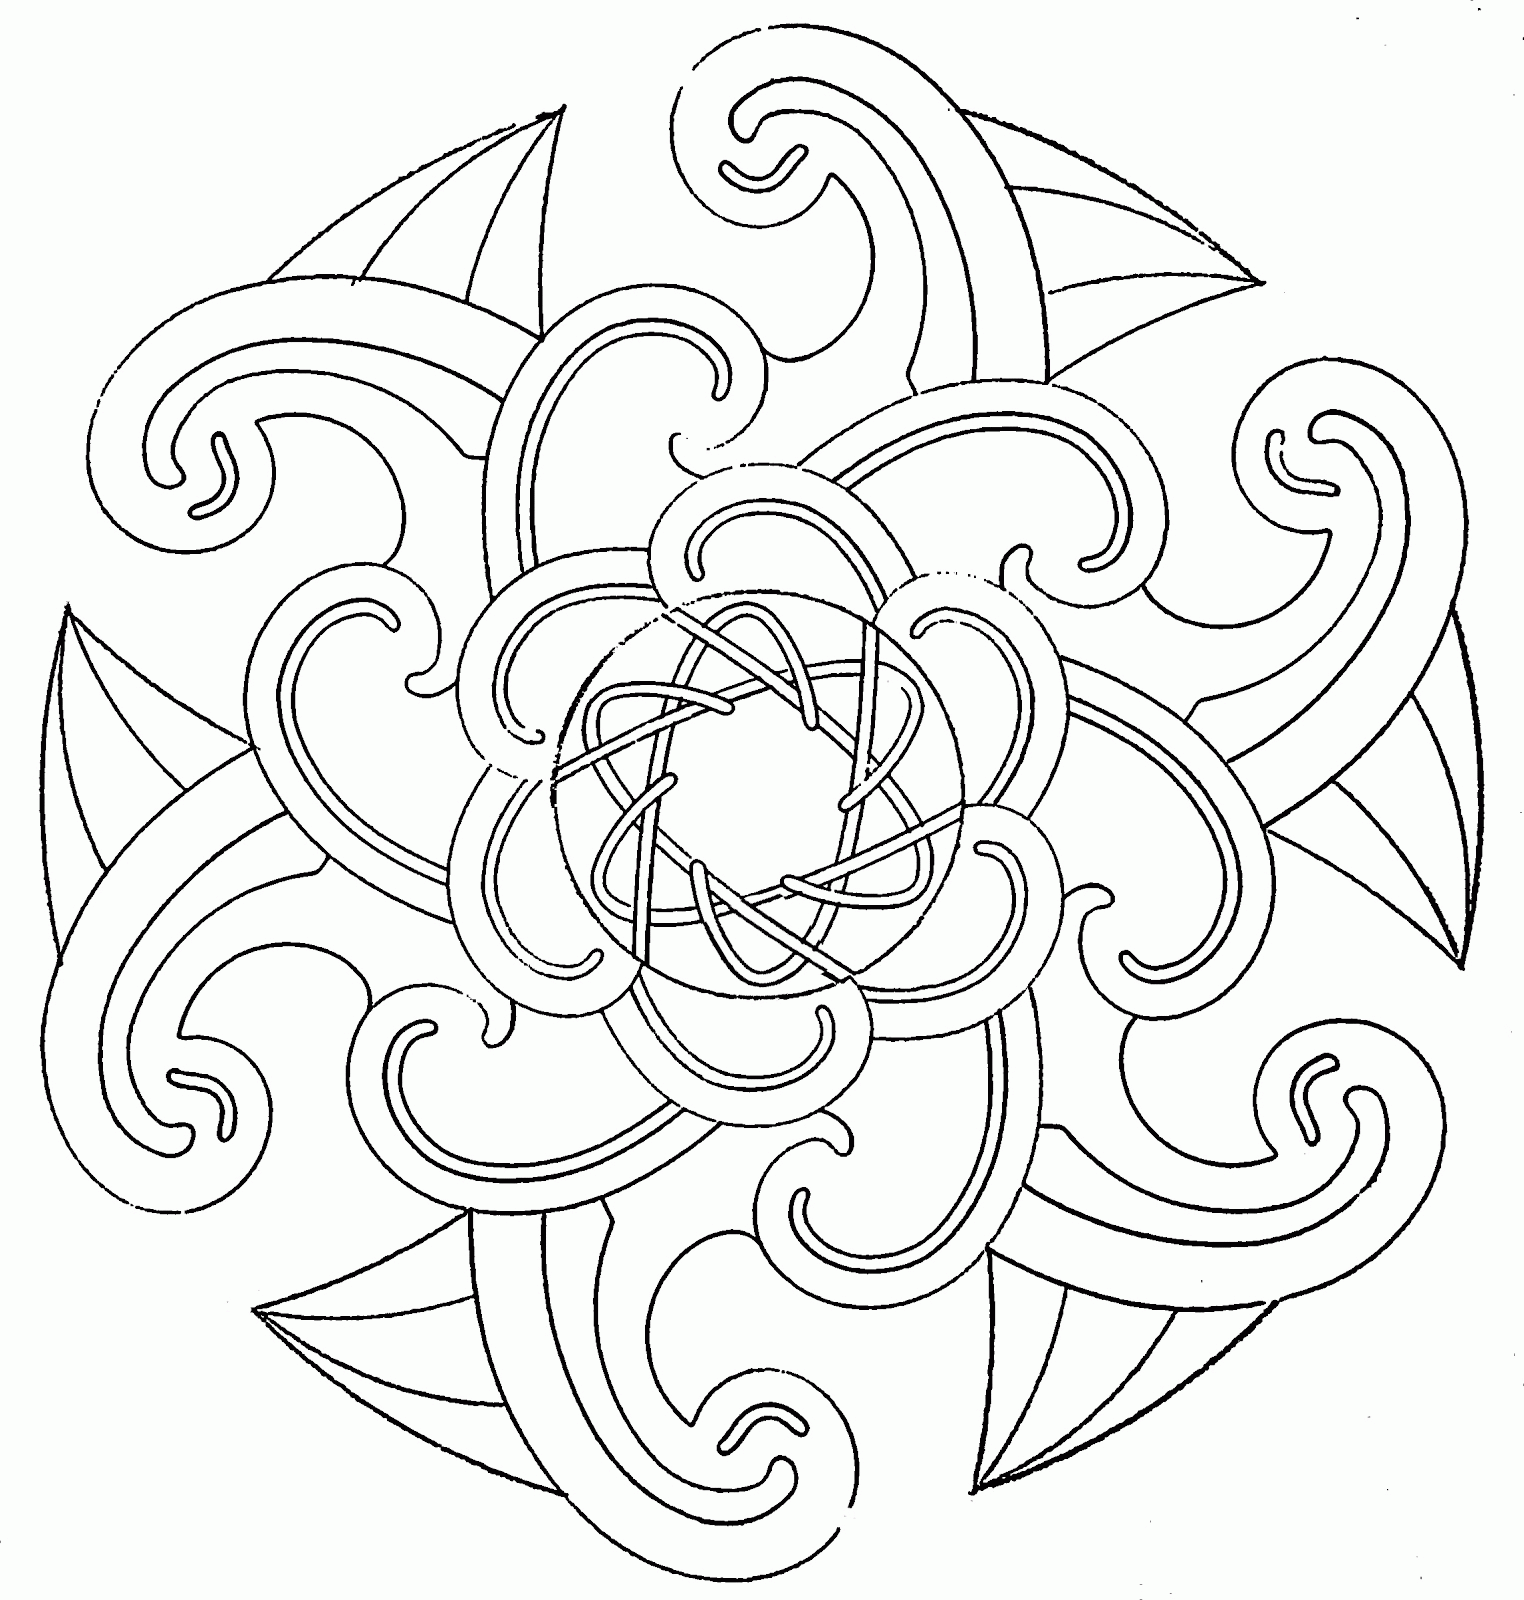 cool designs coloring pages cool coloring pages getcoloringpagescom cool designs pages coloring 